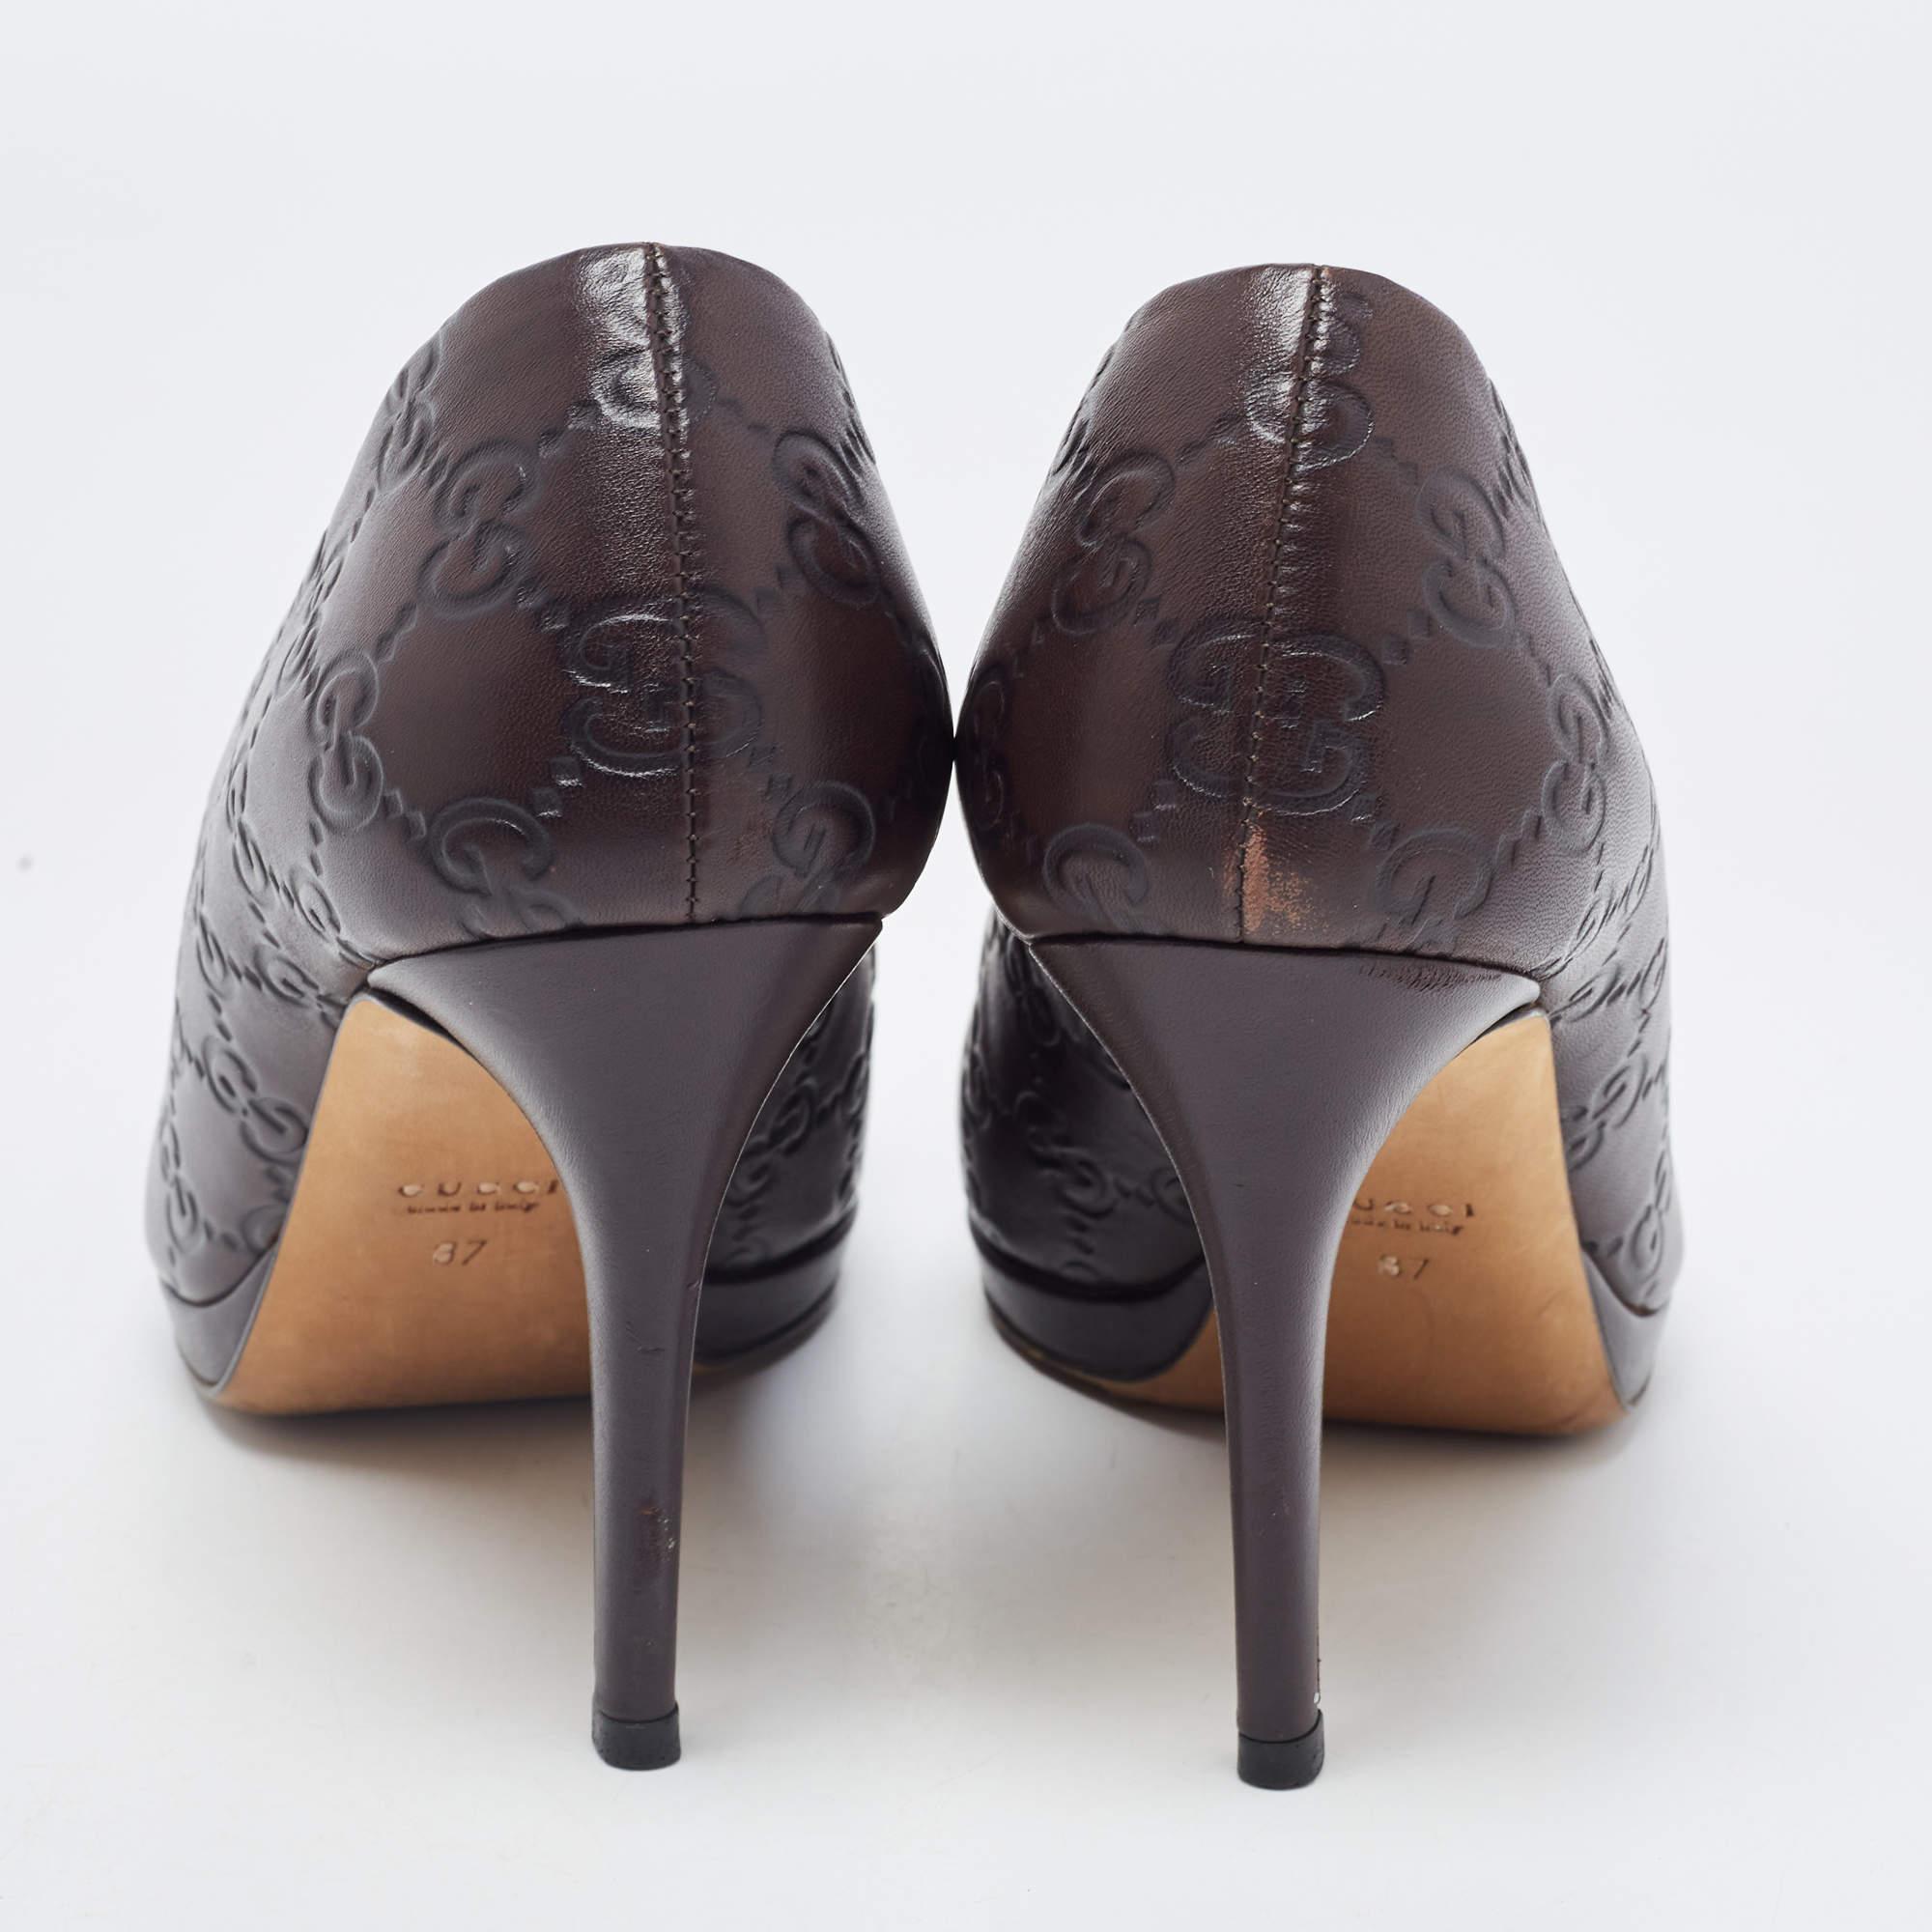 Gucci Dark Brown Guccissima Leather New Hollywood Pumps Size 37 For Sale 1